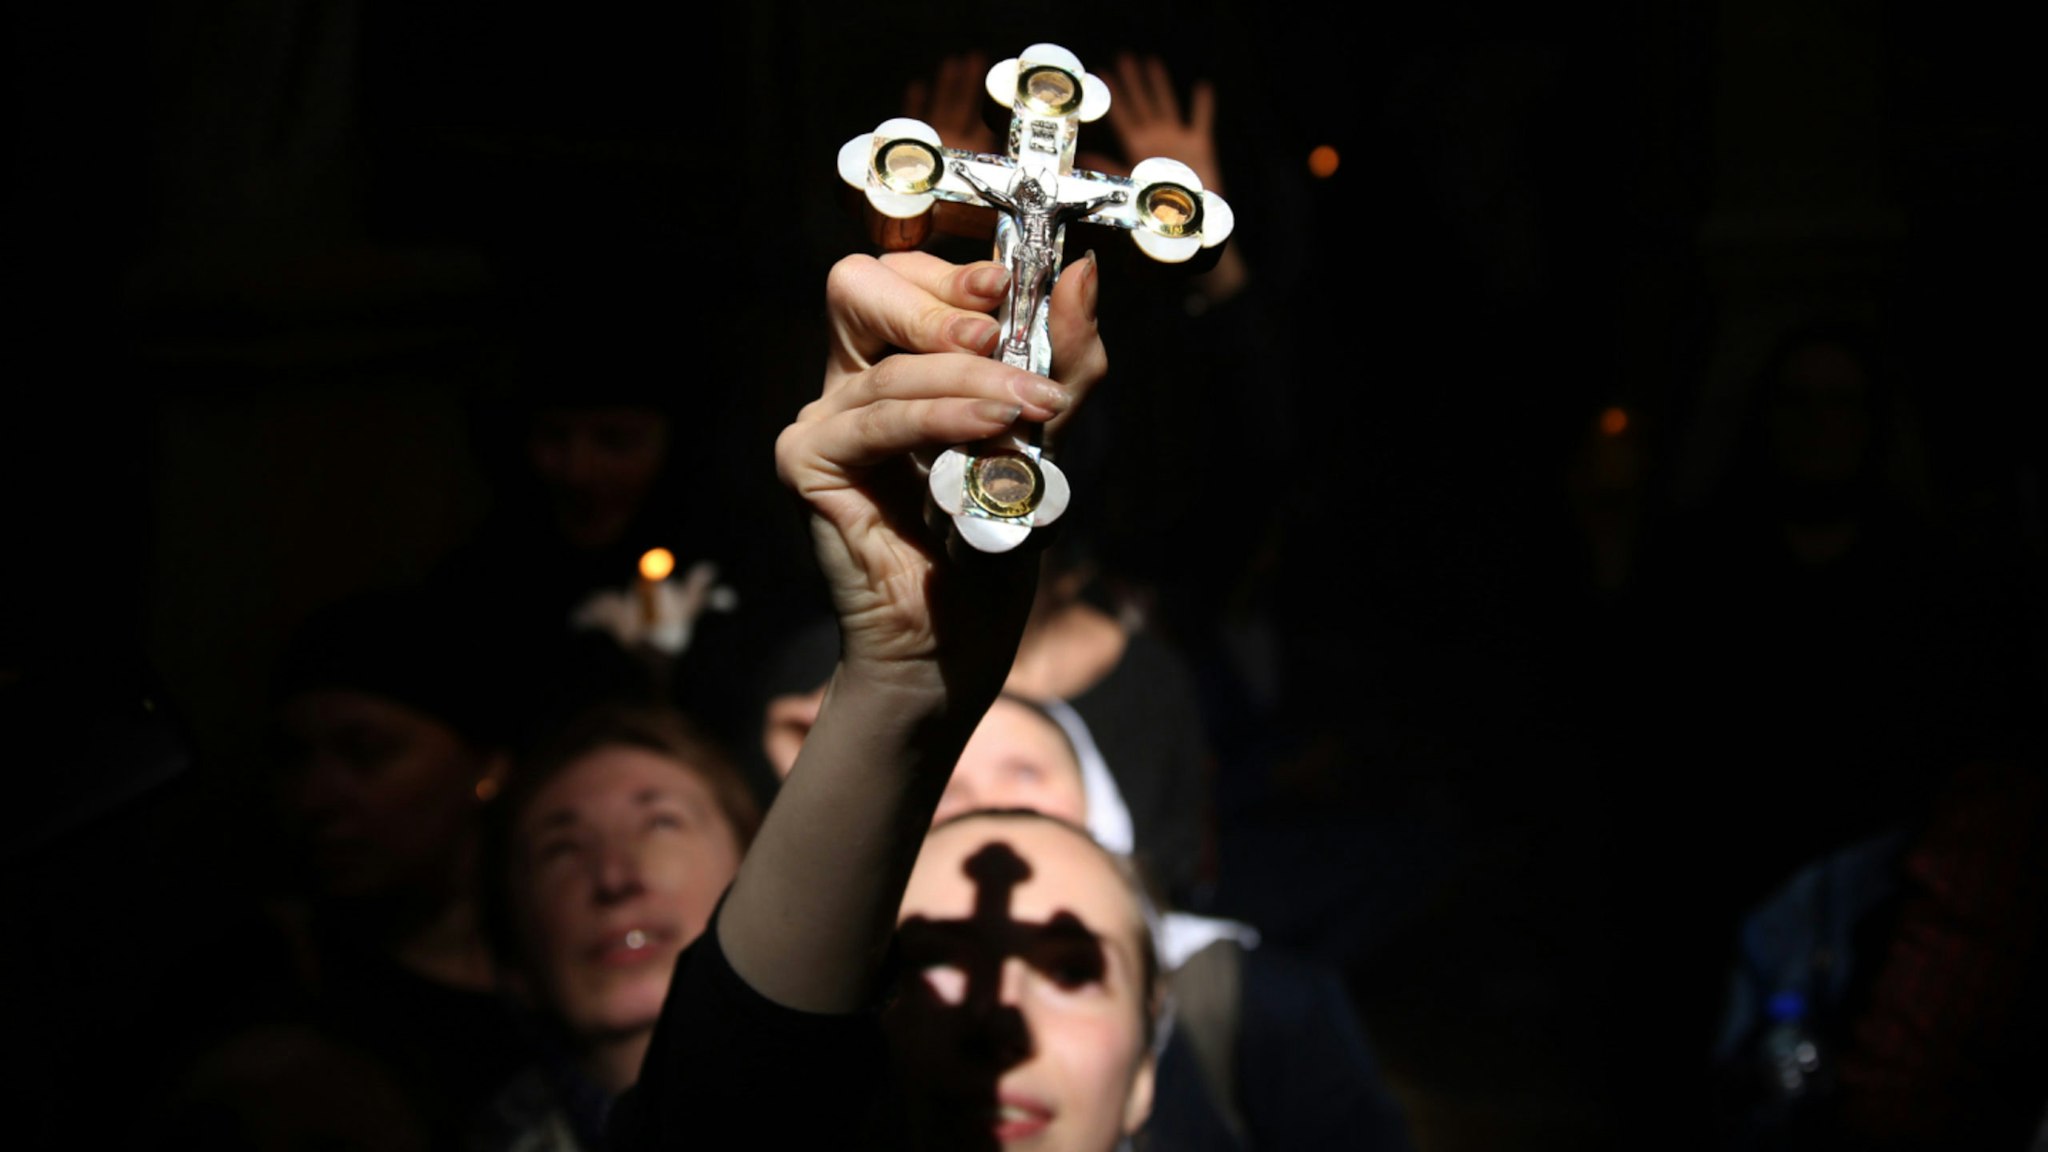 Christian Orthodox worshippers raise their heads as a ray of light comes through during the Holy Fire as thousands gather in the Church of the Holy Sepulchre in Jerusalems Old City on April 7, 2018 during the Orthodox Easter ceremony.